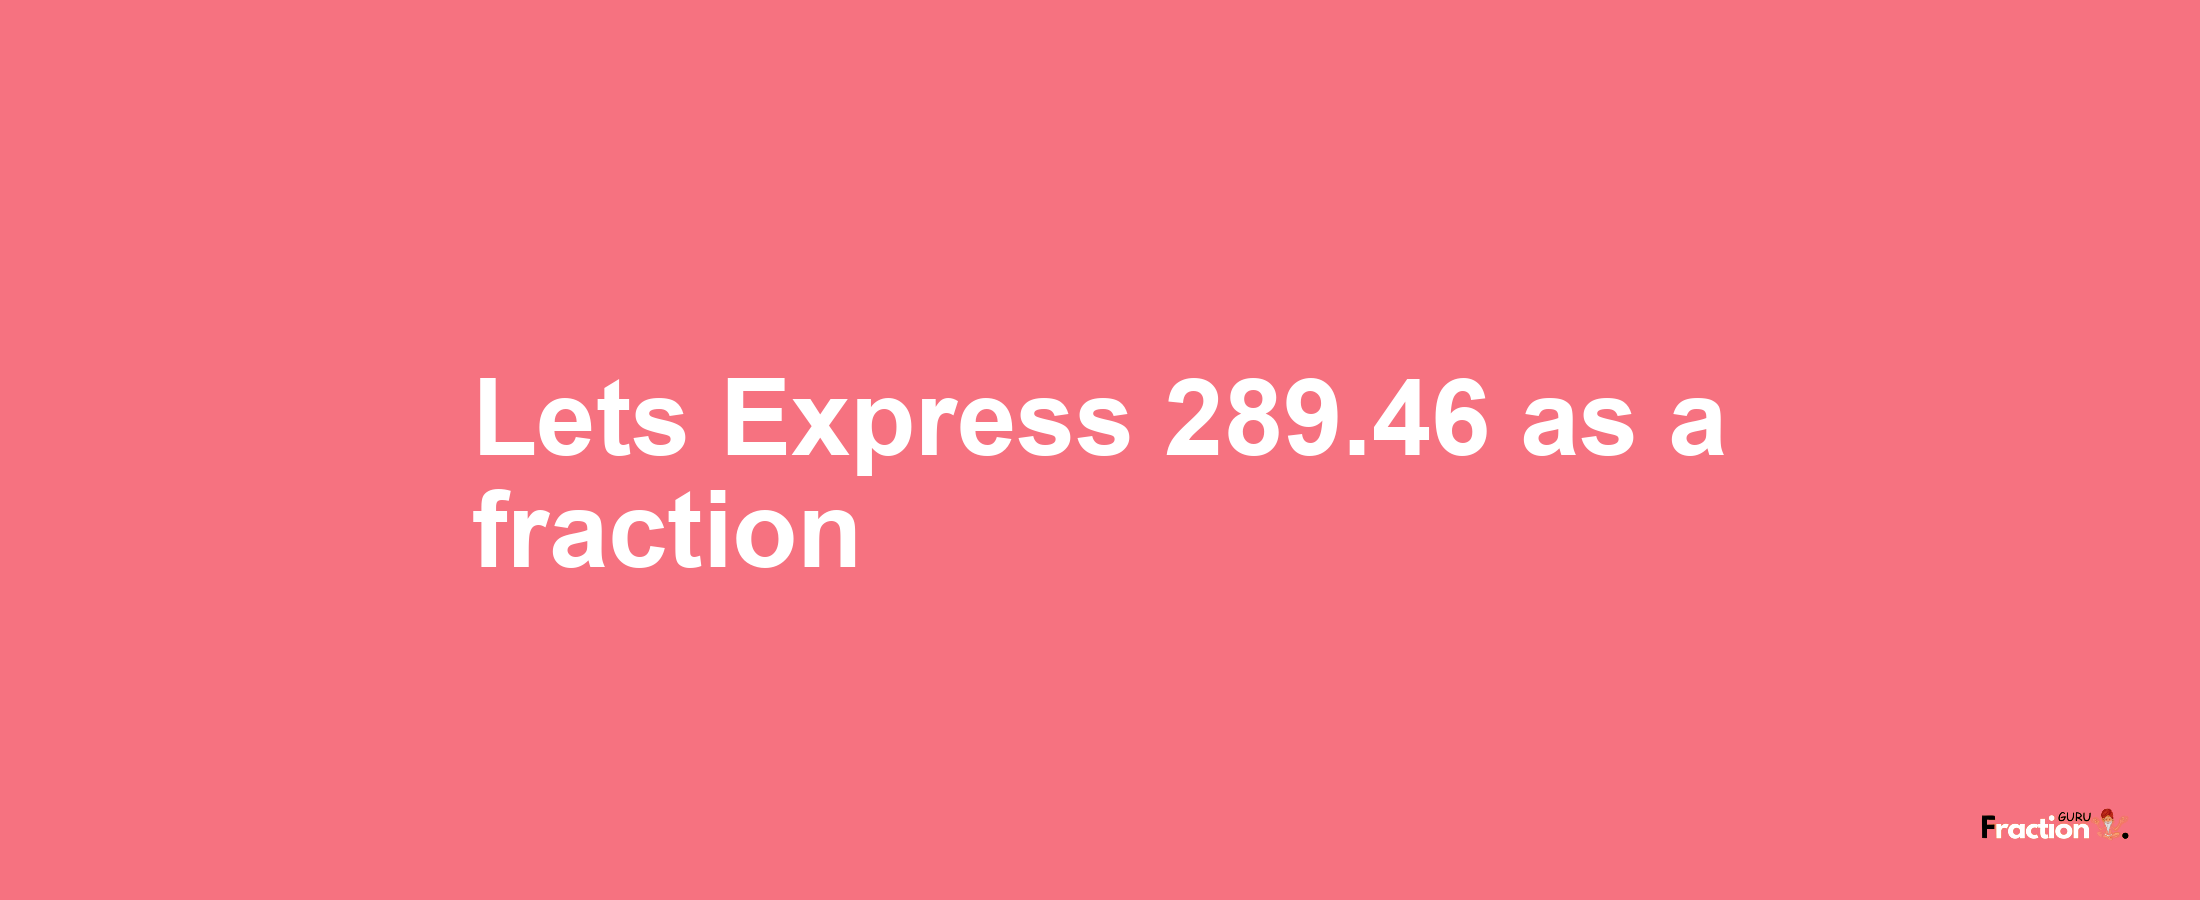 Lets Express 289.46 as afraction